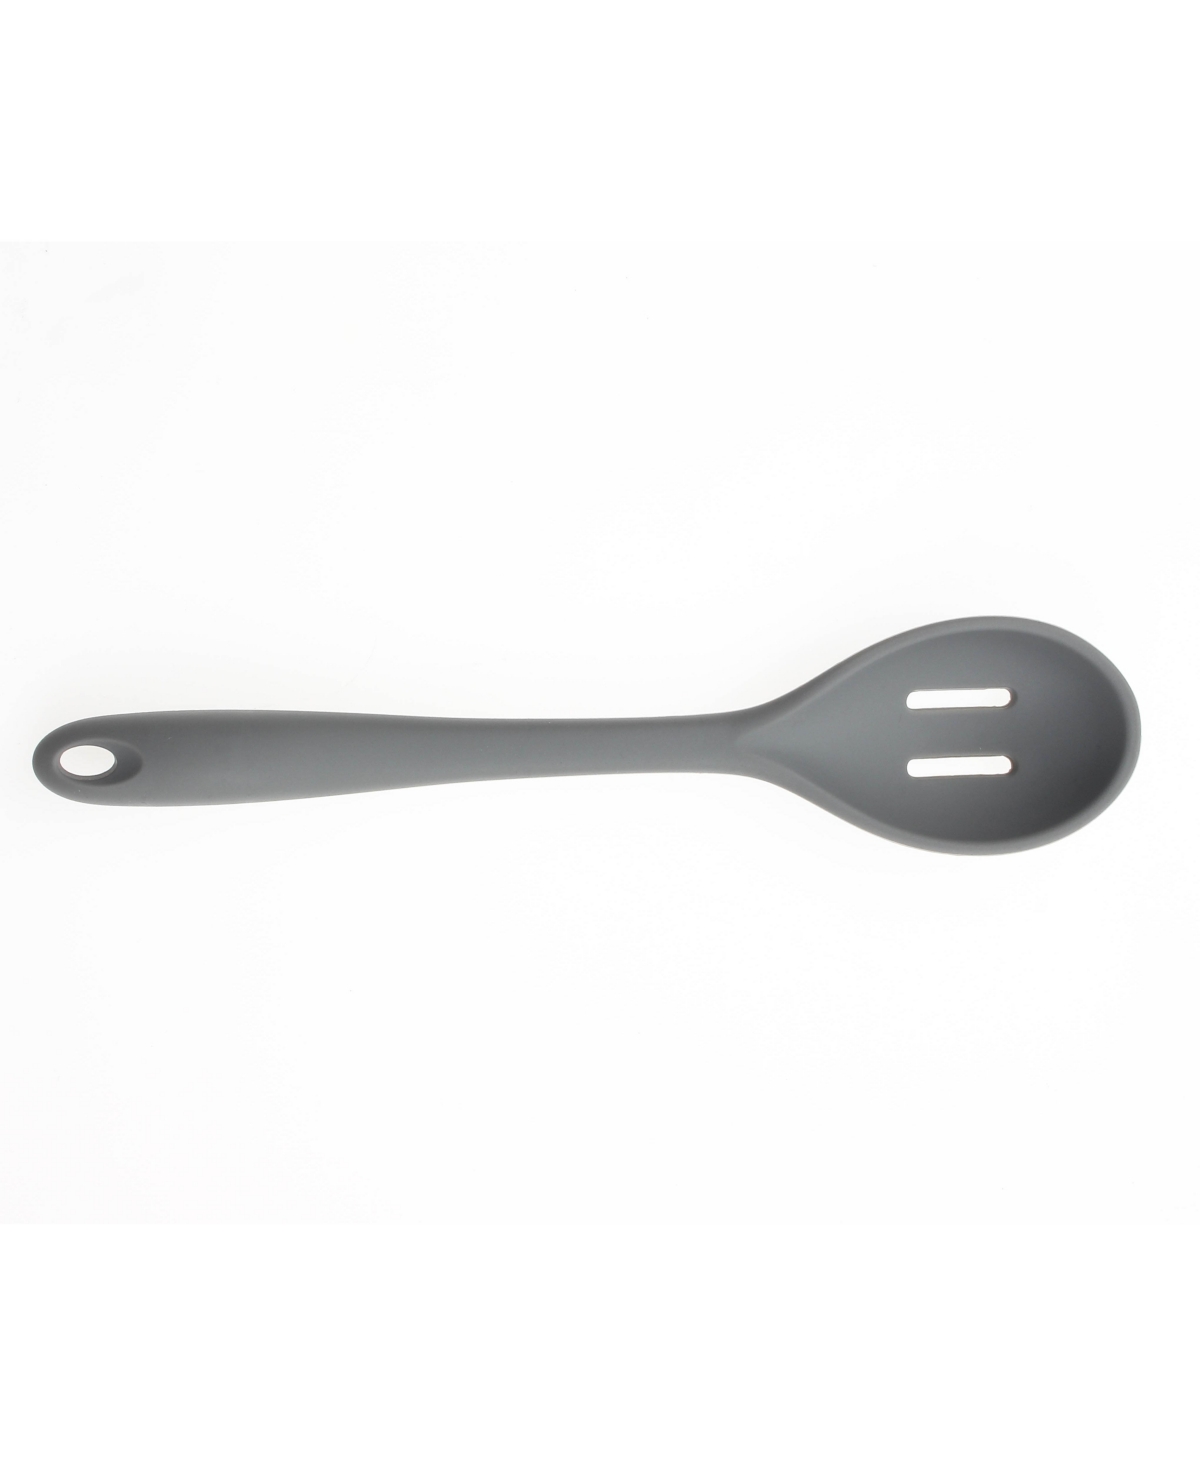 Art & Cook Slotted Spoon In Gray